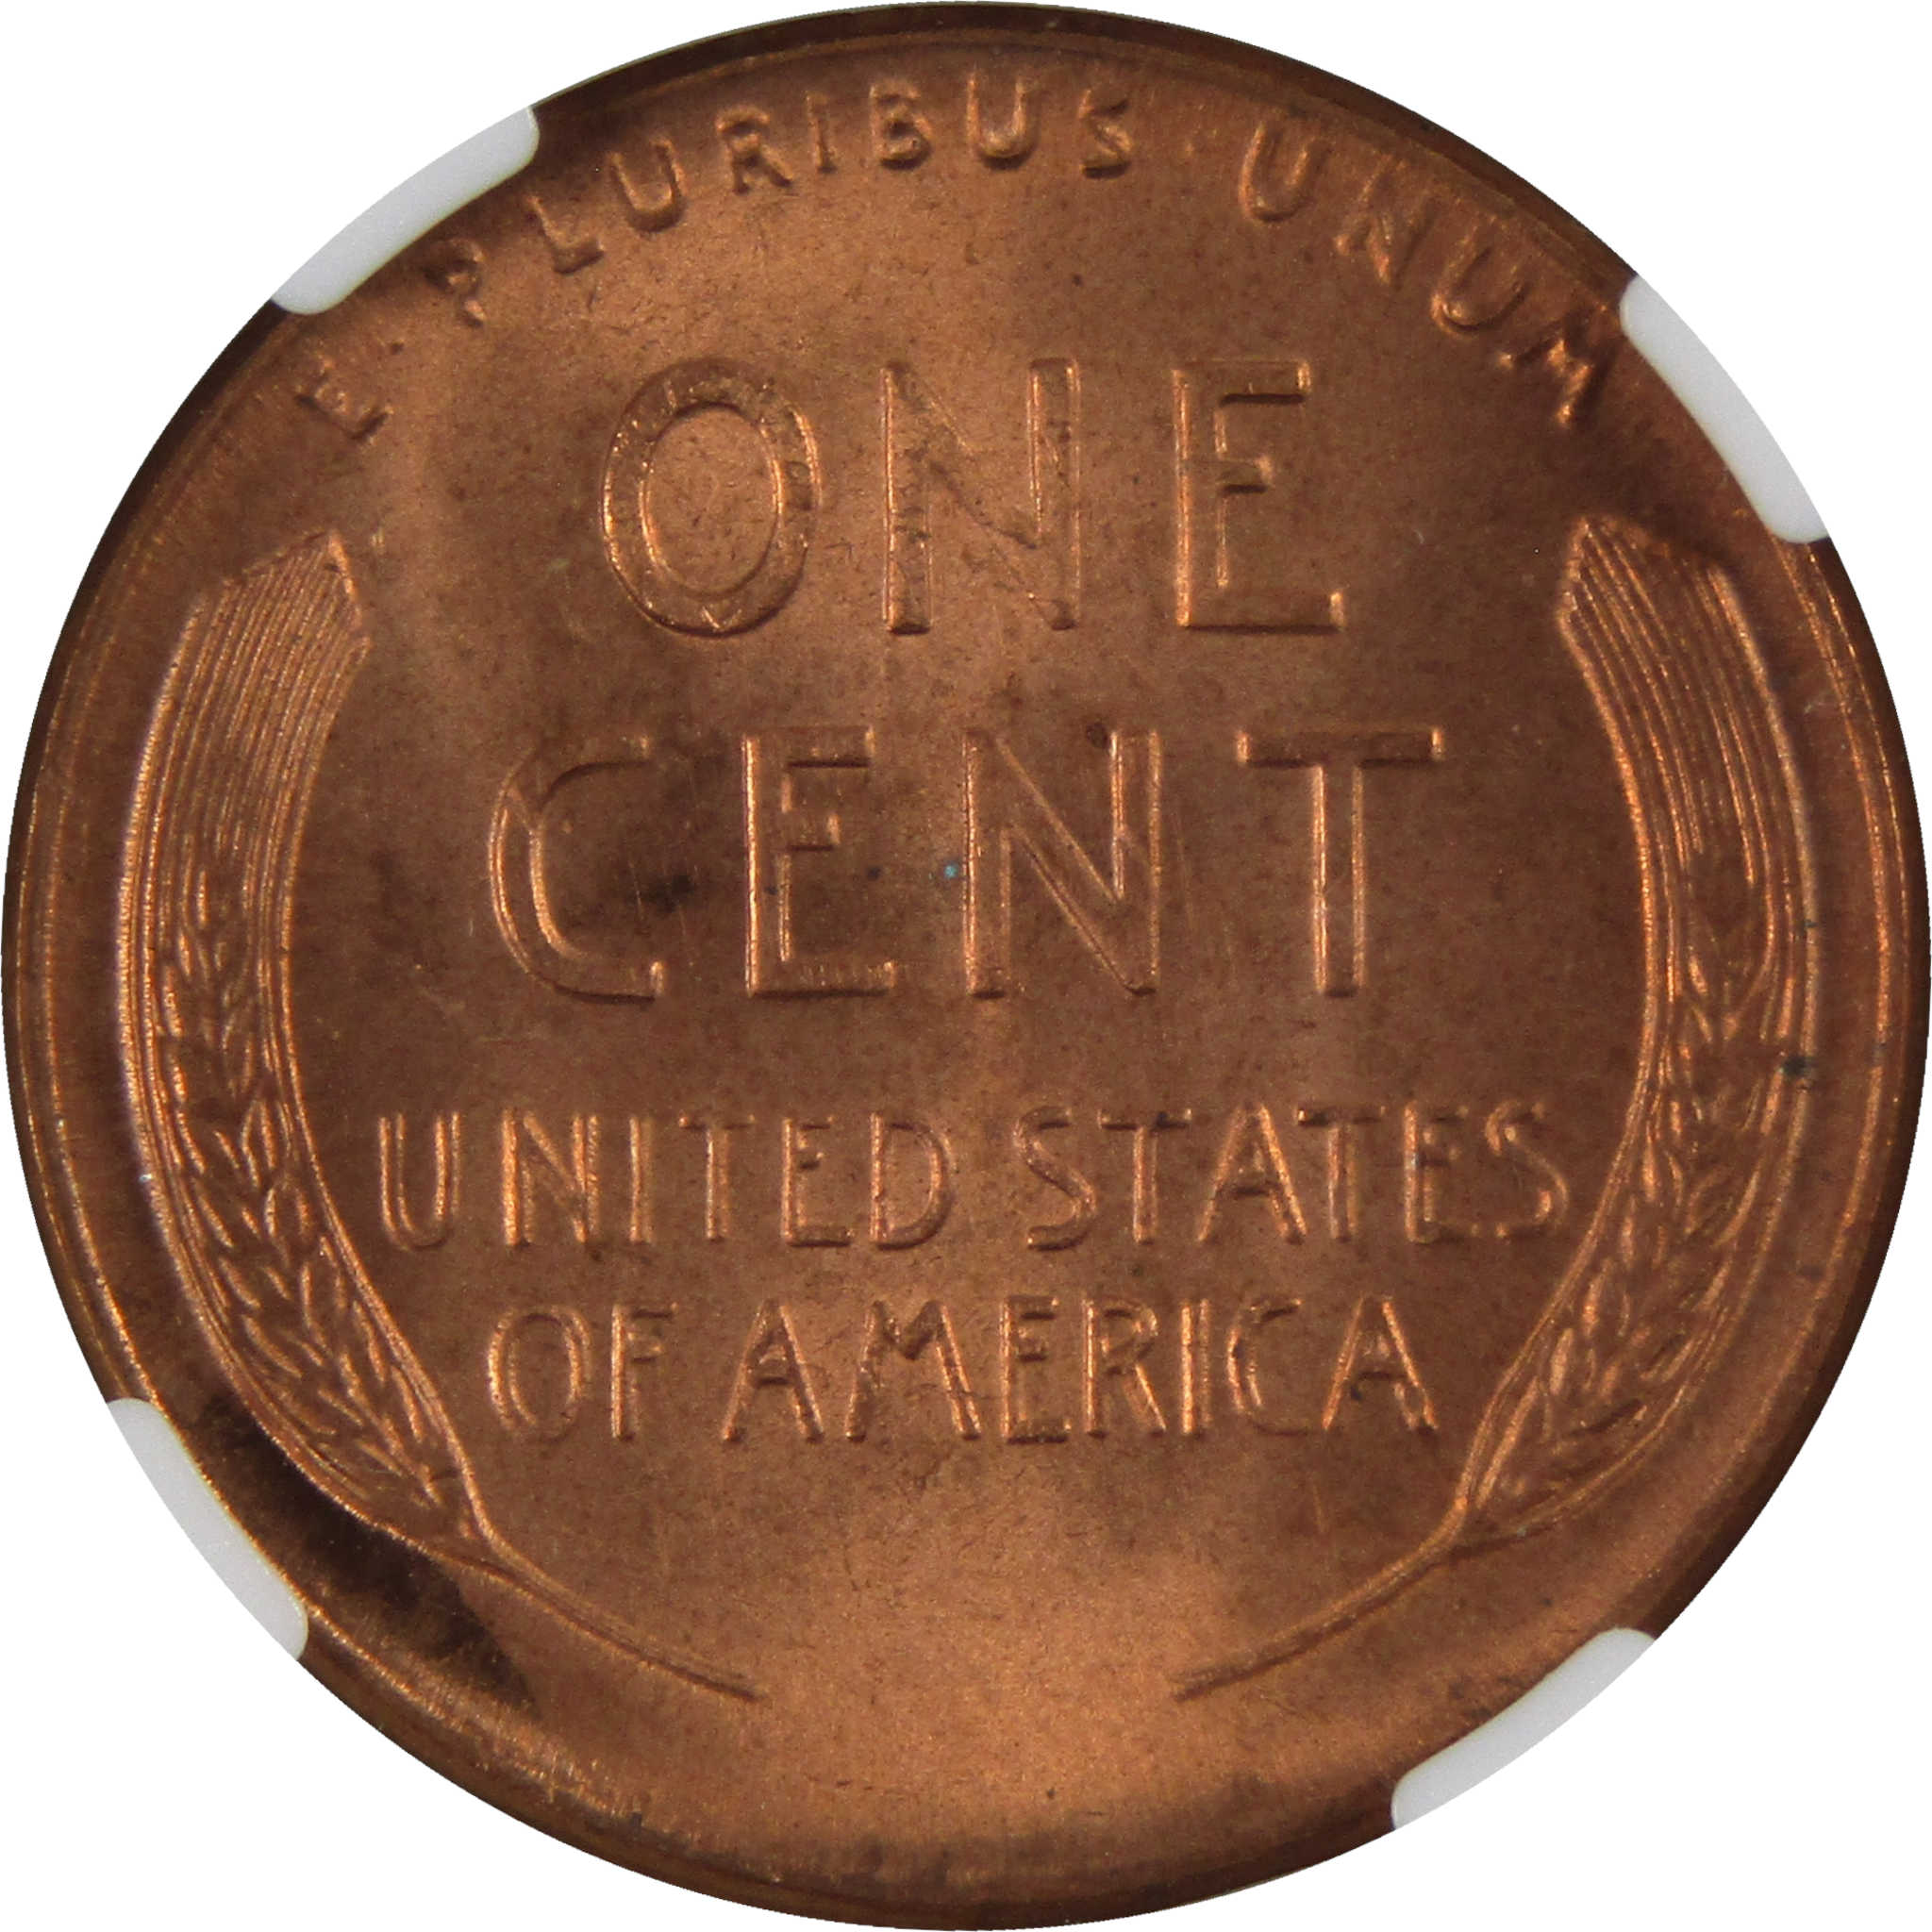 1948 Lincoln Wheat Cent MS 66 RD NGC Penny 1c Uncirculated SKU:I3626